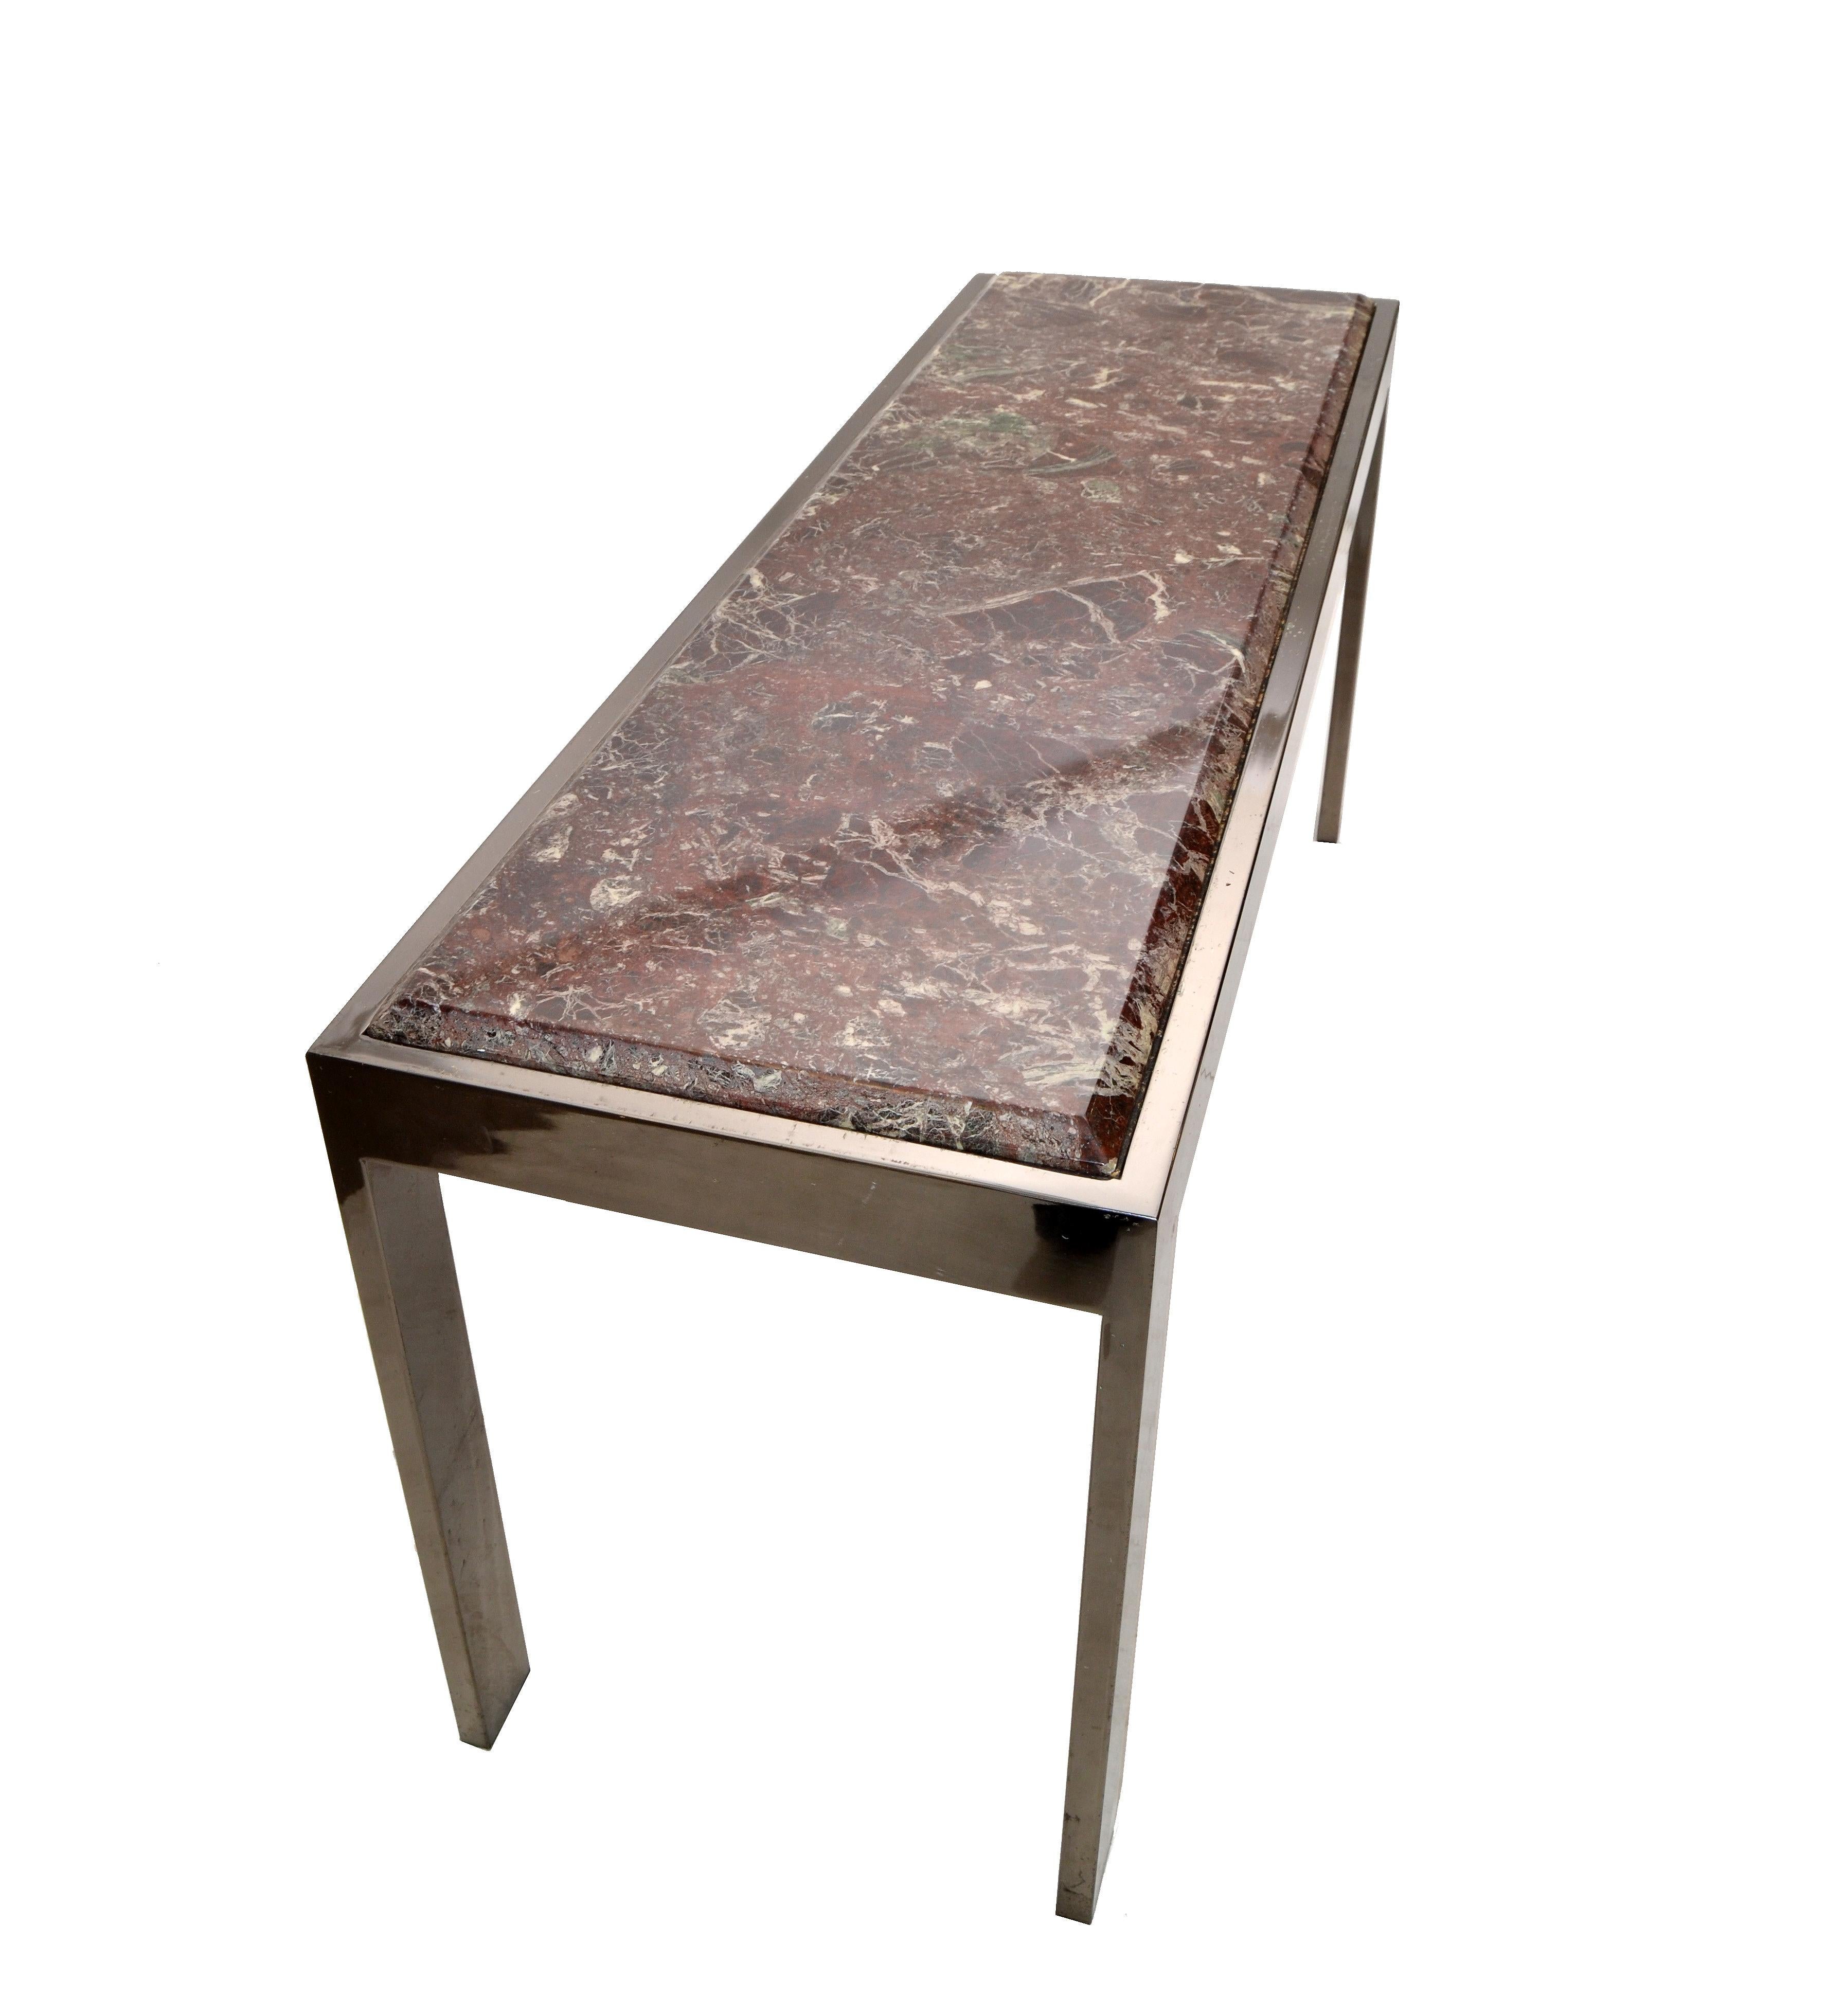 20th Century Mid-Century Modern Long Chrome & Beveled Verona Marble Top Console Table, 1975 For Sale